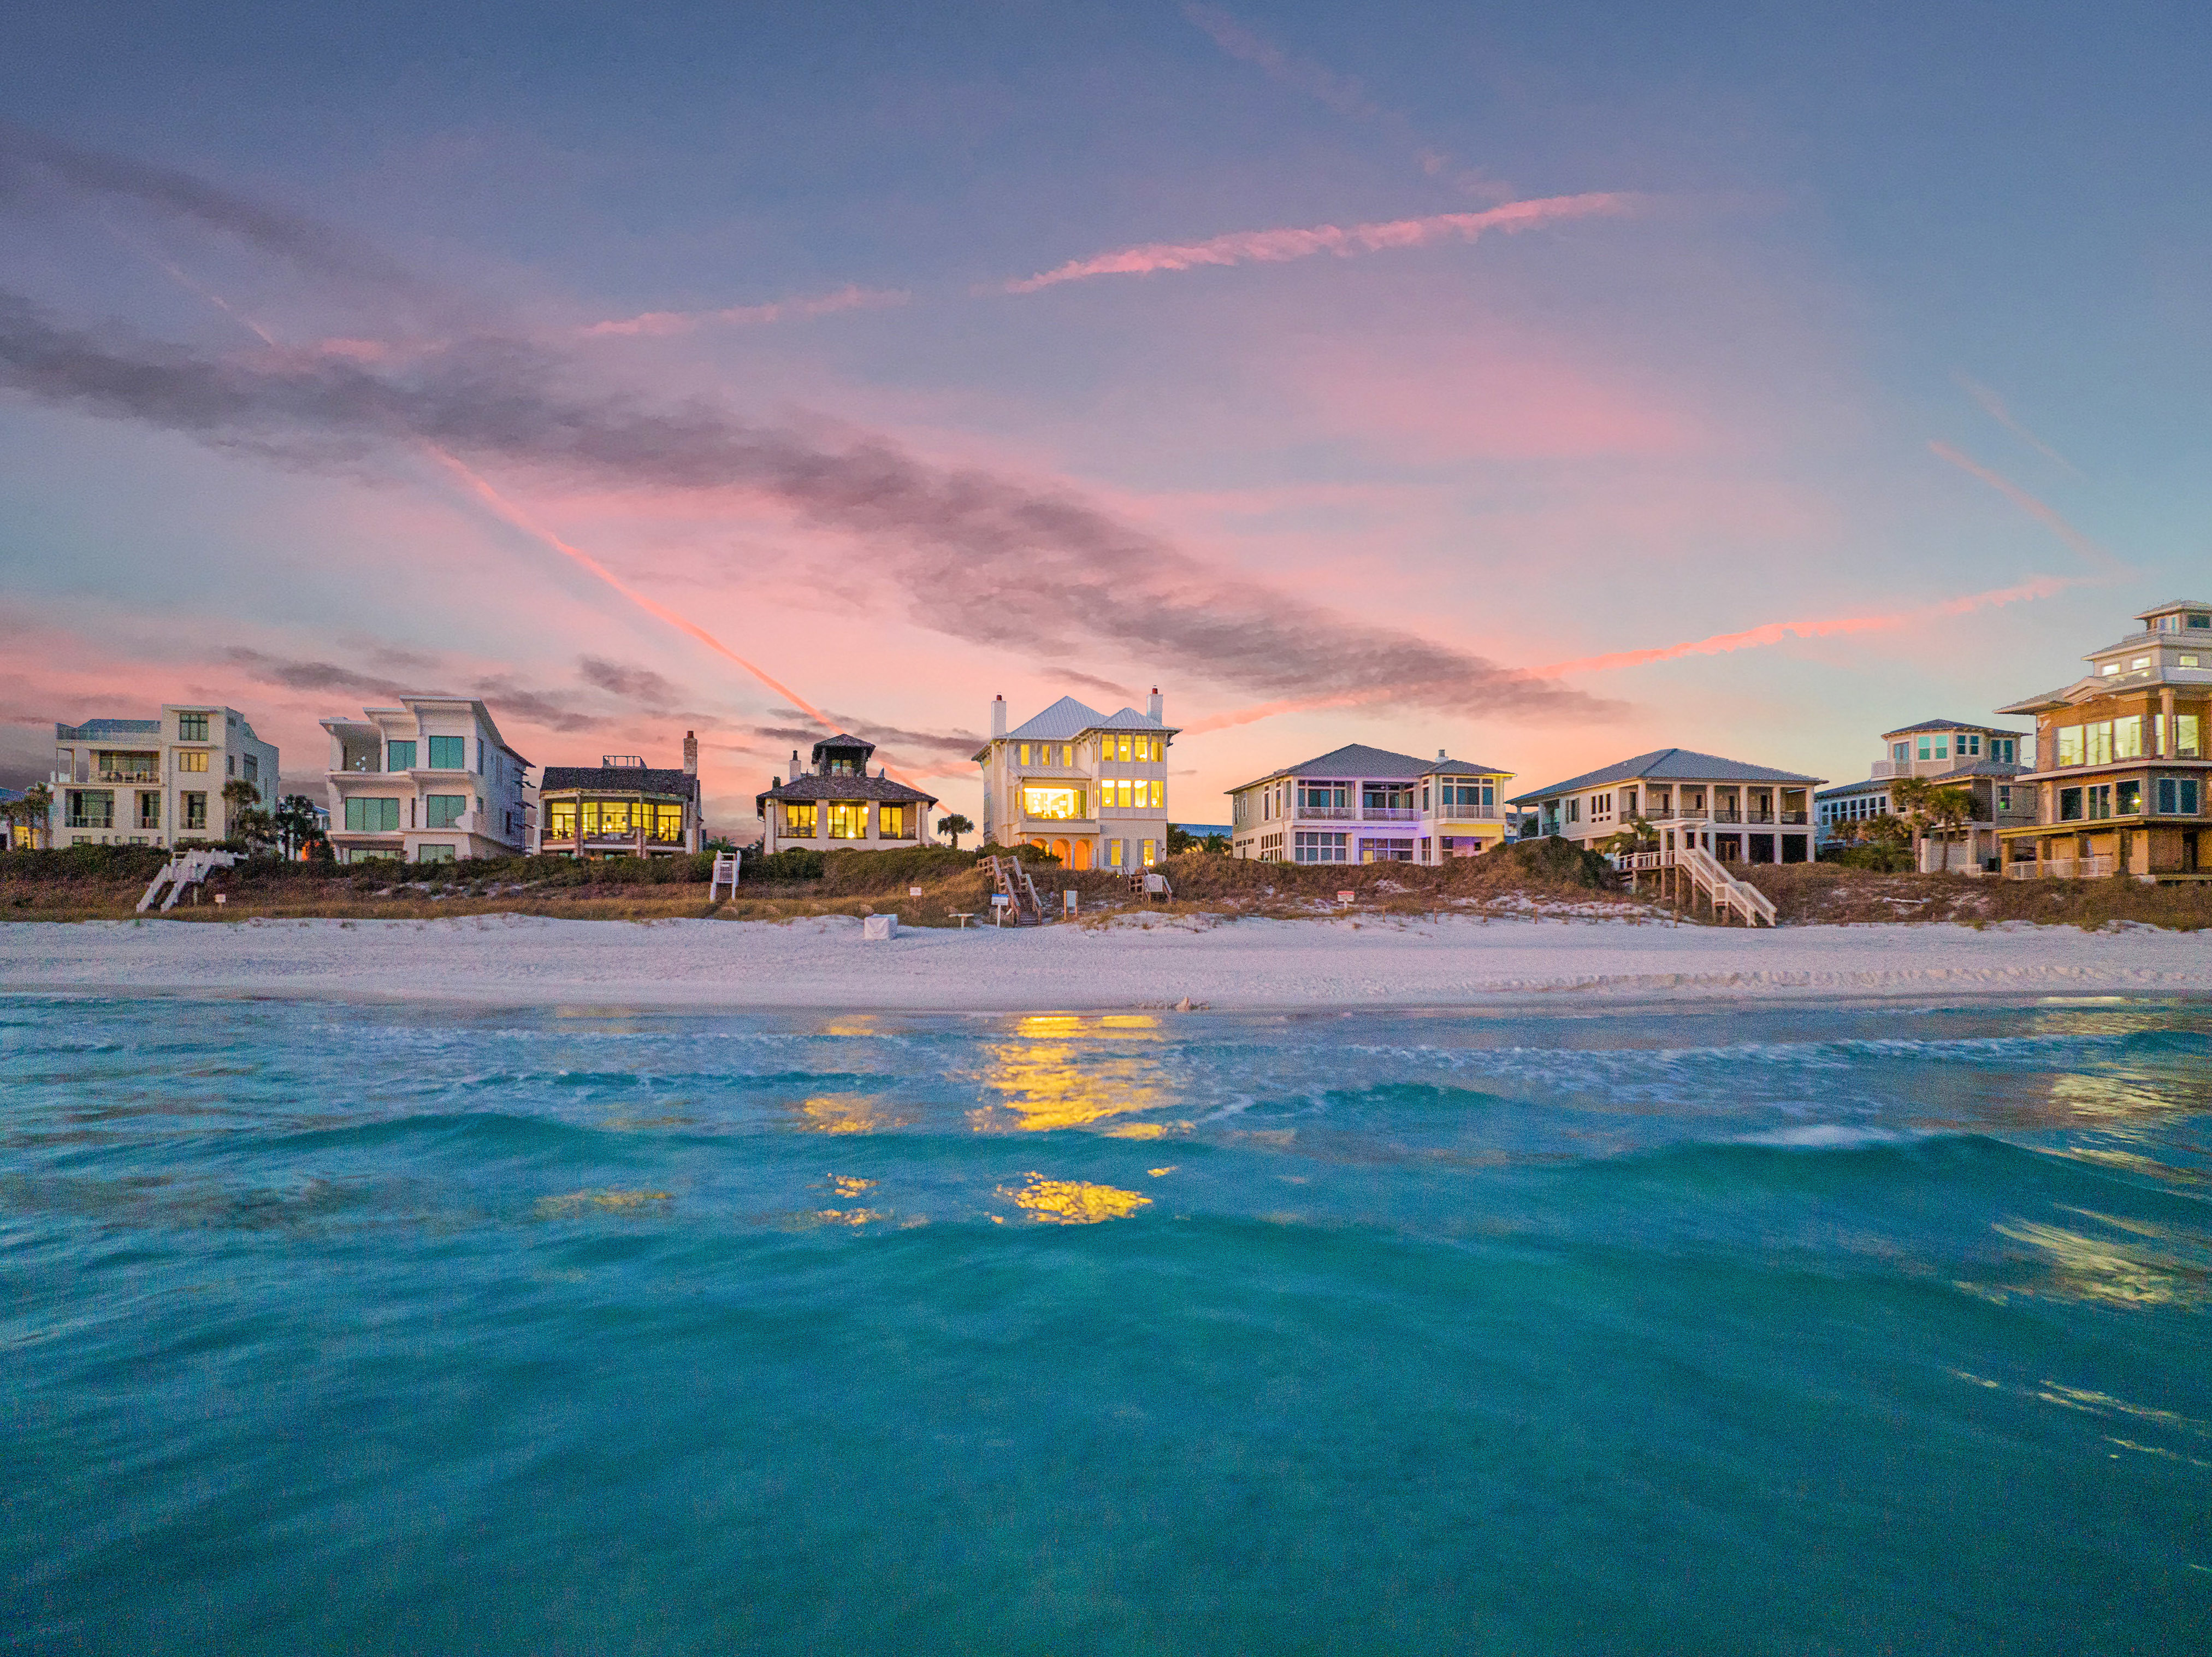 An exceptional beach sunset over the Gulf front homes along 30A.